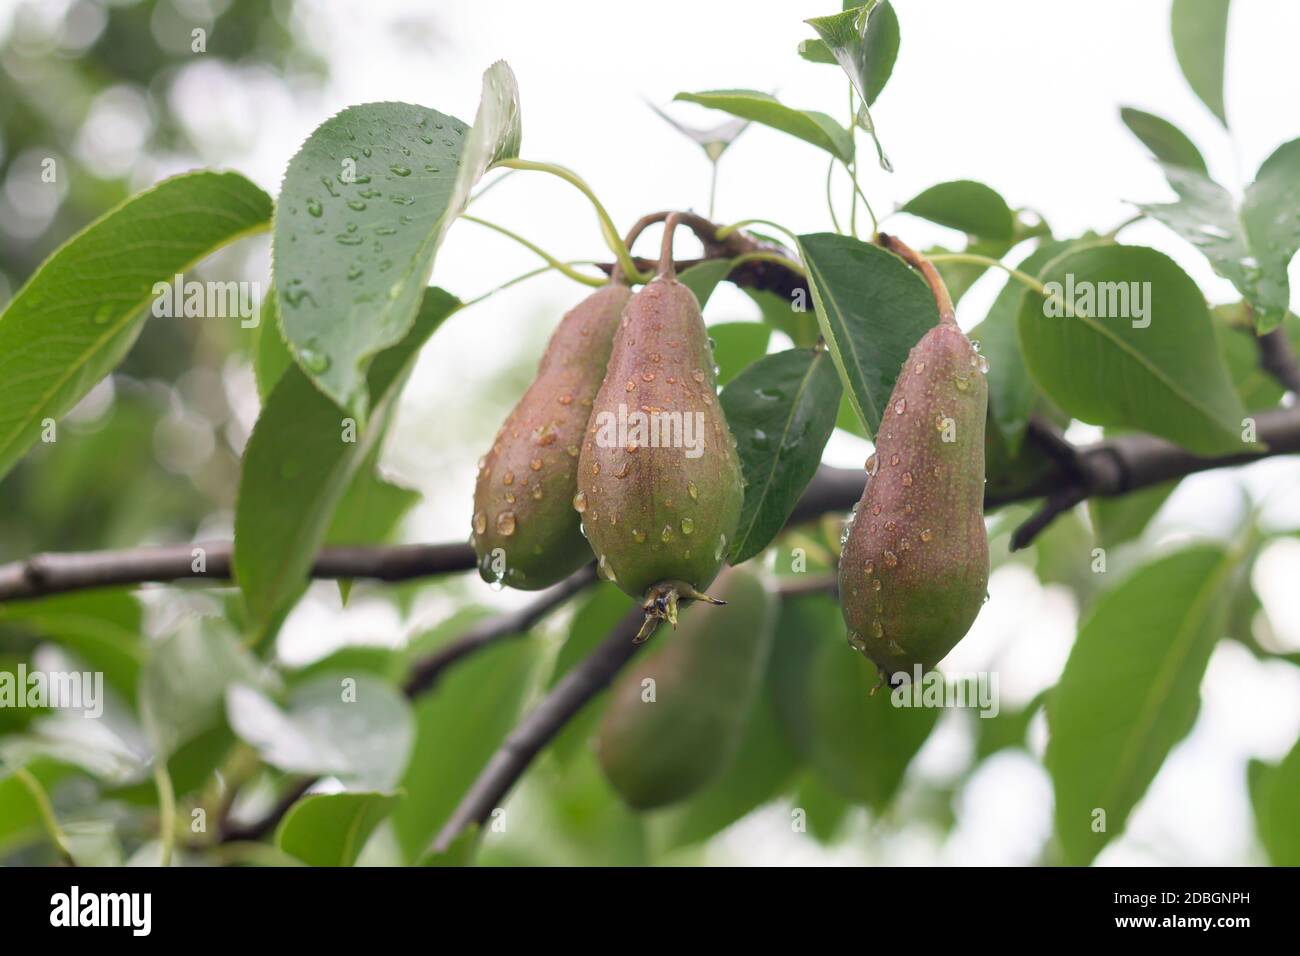 Ripe organic pears hanging on tree in summer orchard Stock Photo